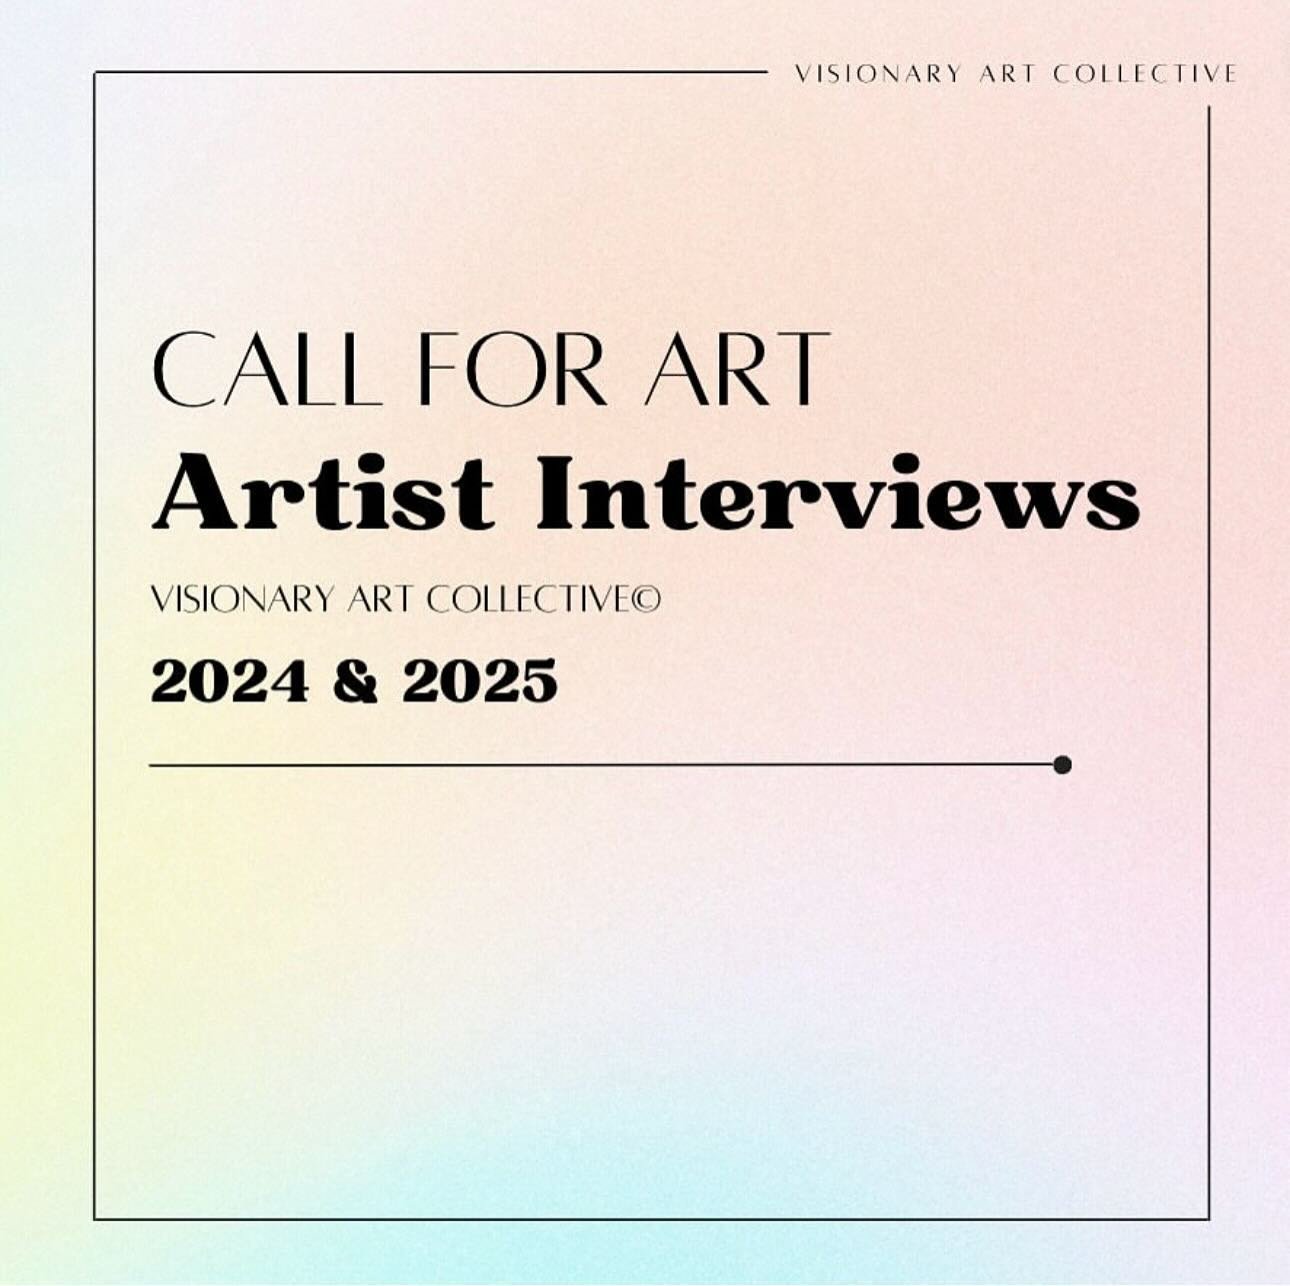 ⁠
Call For Art! 📣✨ We&rsquo;re currently accepting submissions for artists interviews on the VAC website.⚡️

To learn more and apply, visit the link in bio or head over to https://visionaryartcollective.submittable.com/submit

Every week we feature 